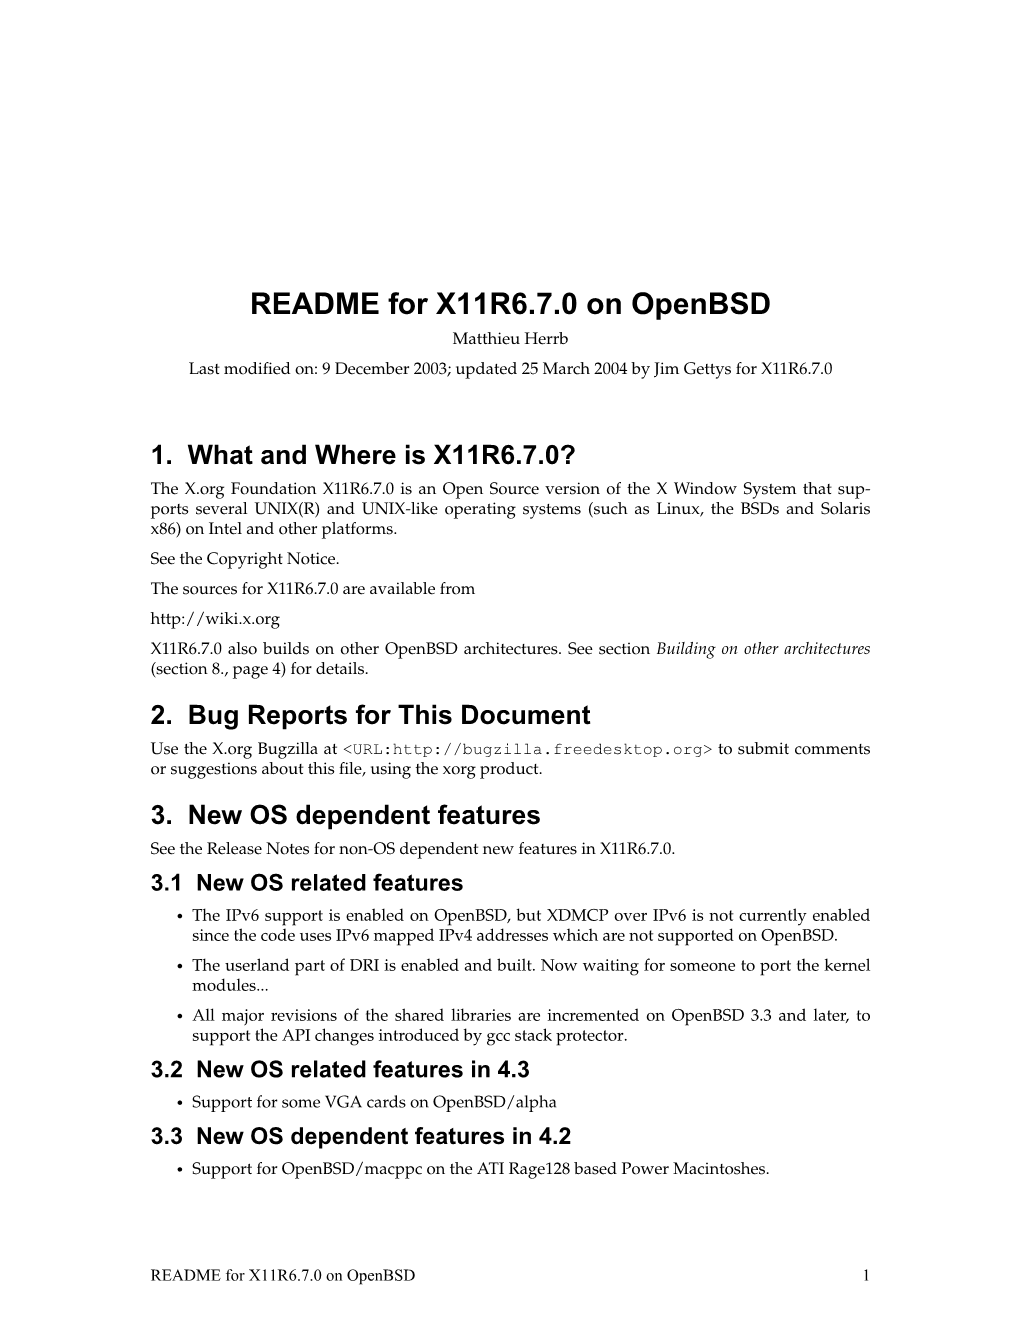 README for X11R6.7.0 on Openbsd Matthieu Herrb Last Modiﬁed On: 9 December 2003; Updated 25 March 2004 by Jim Gettys for X11R6.7.0